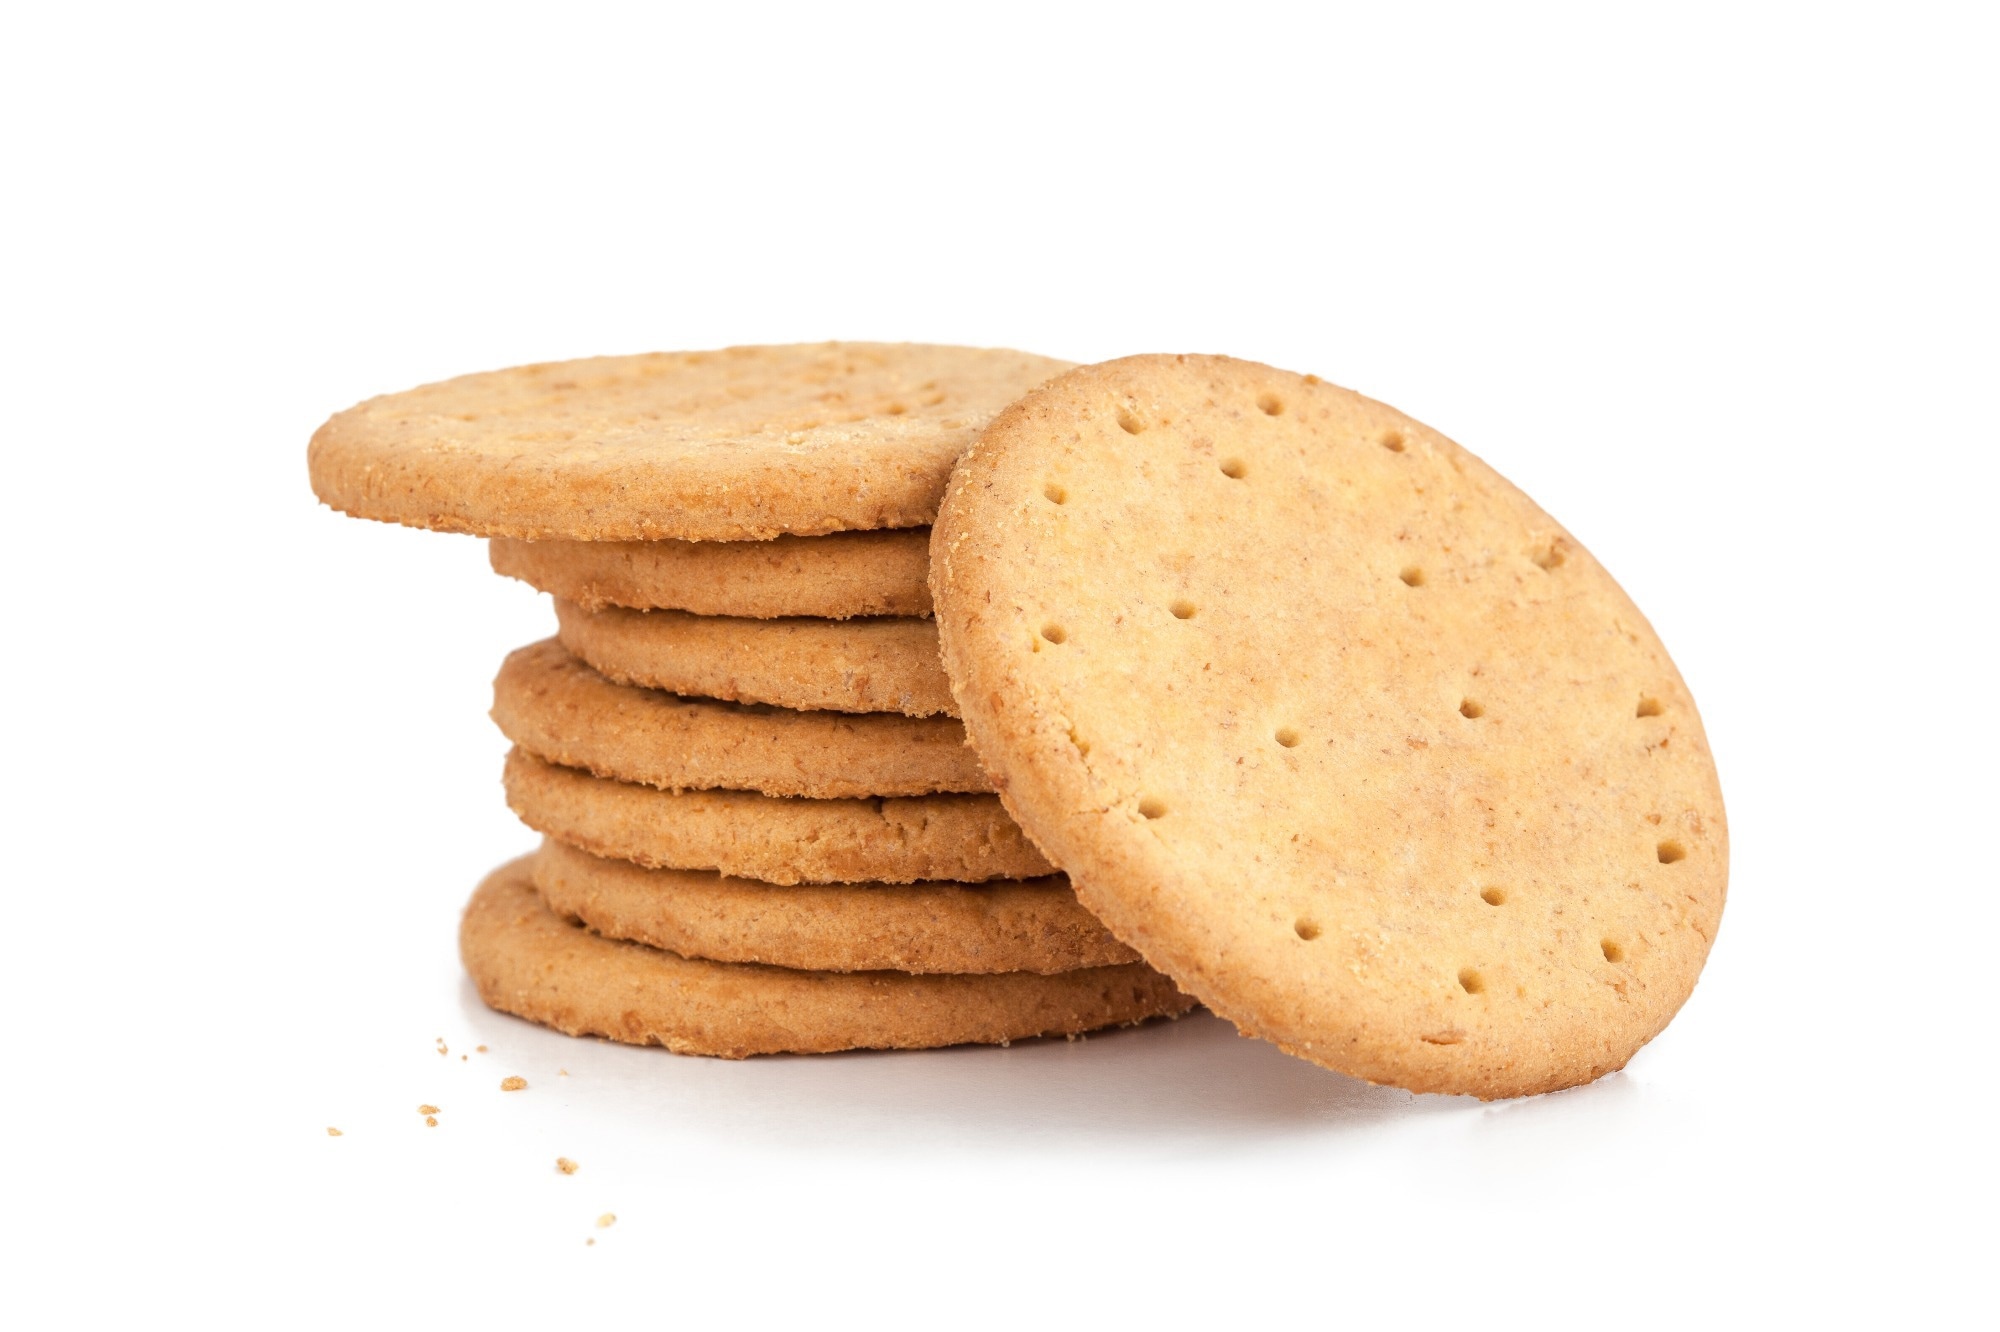 Can sugar-free biscuits curb appetite in overweight adults? New study explores